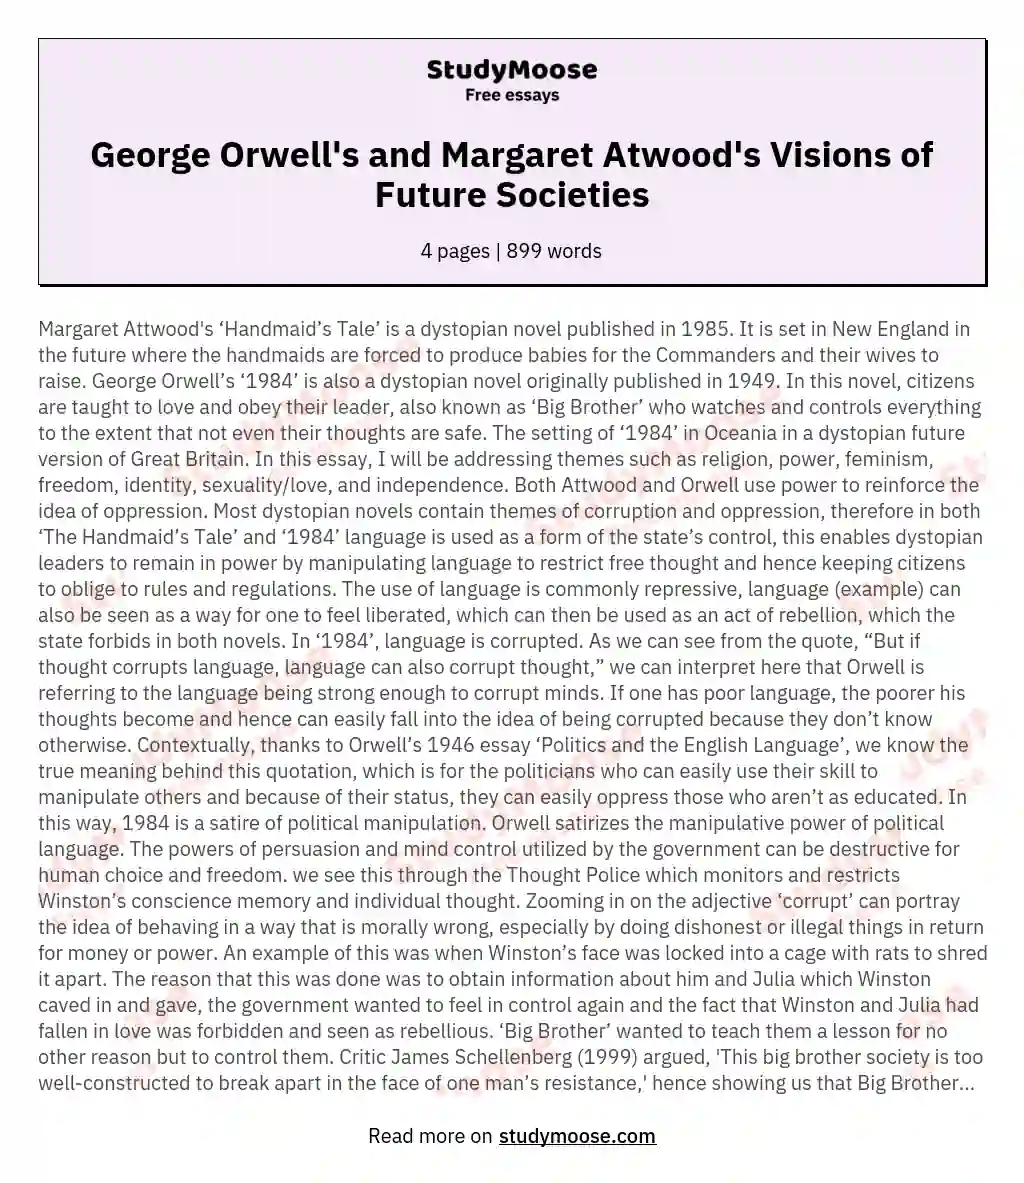 George Orwell's and Margaret Atwood's Visions of Future Societies